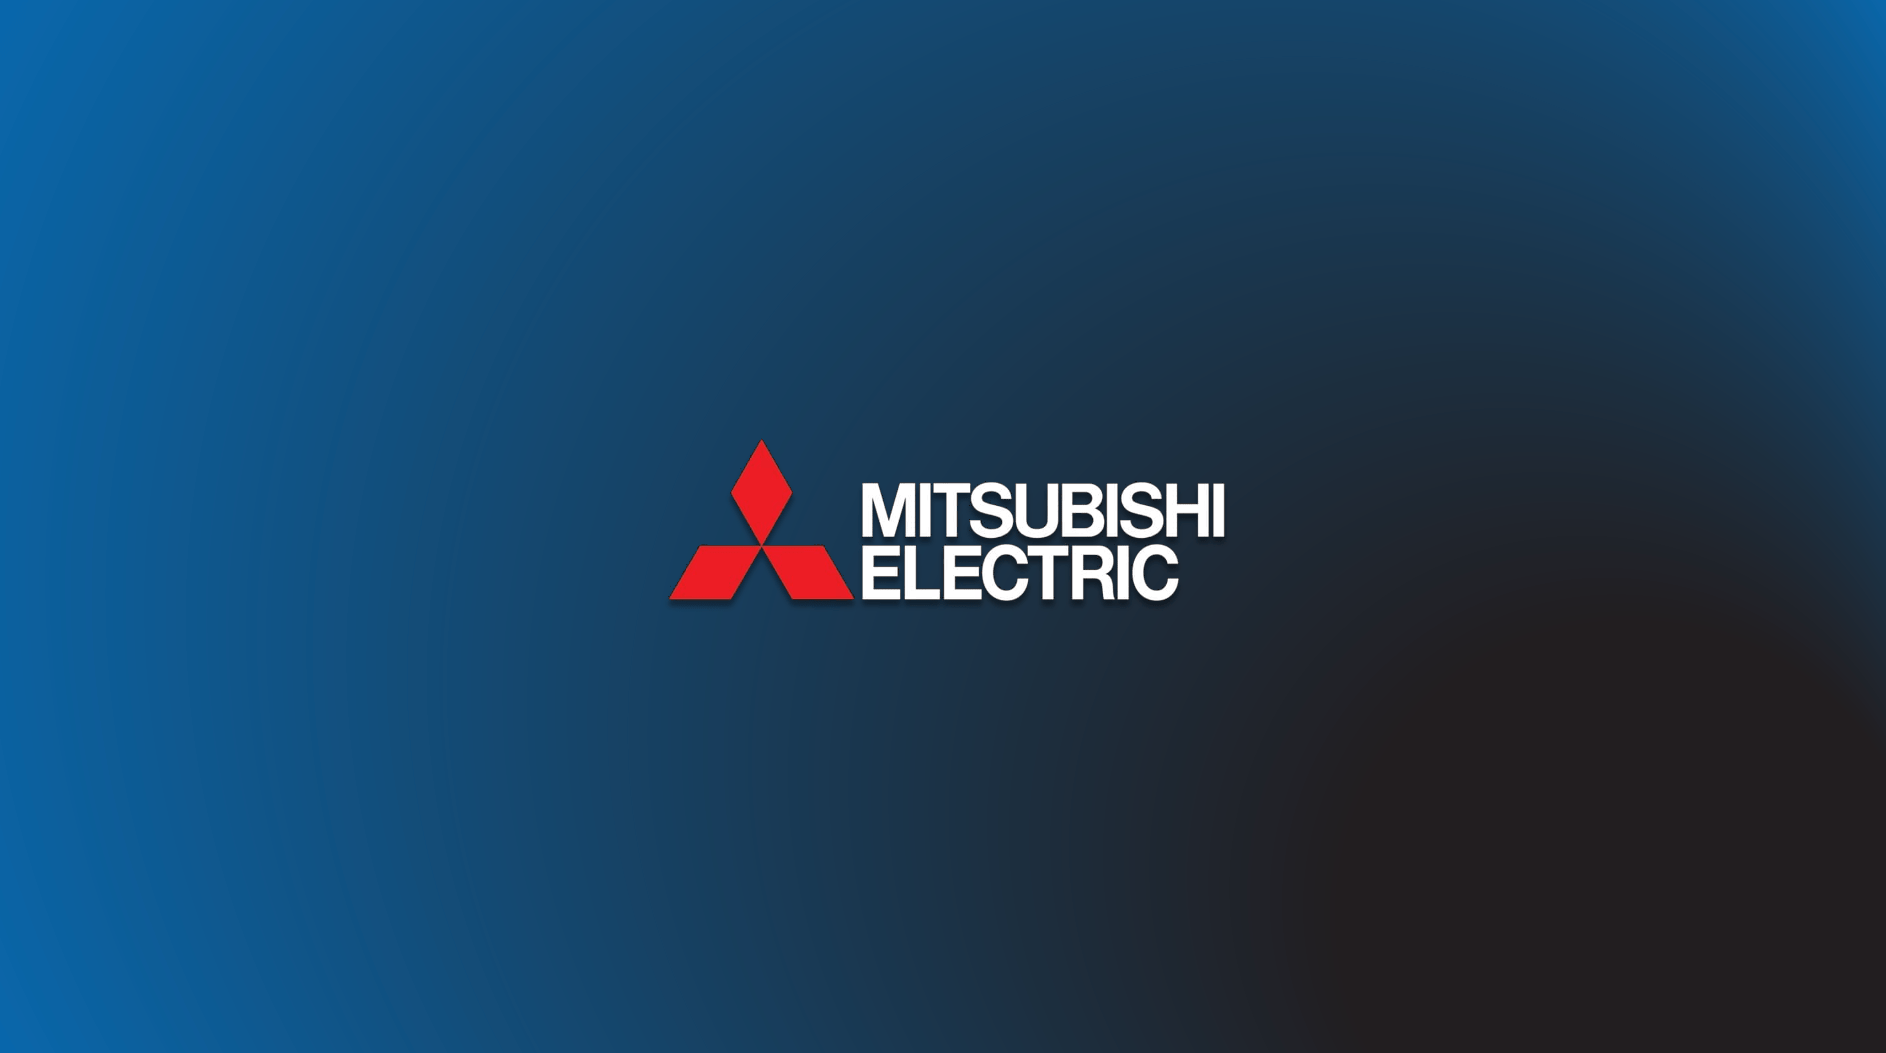 Mitsubishi Electric Faked Safety And Quality Control Tests For Decades